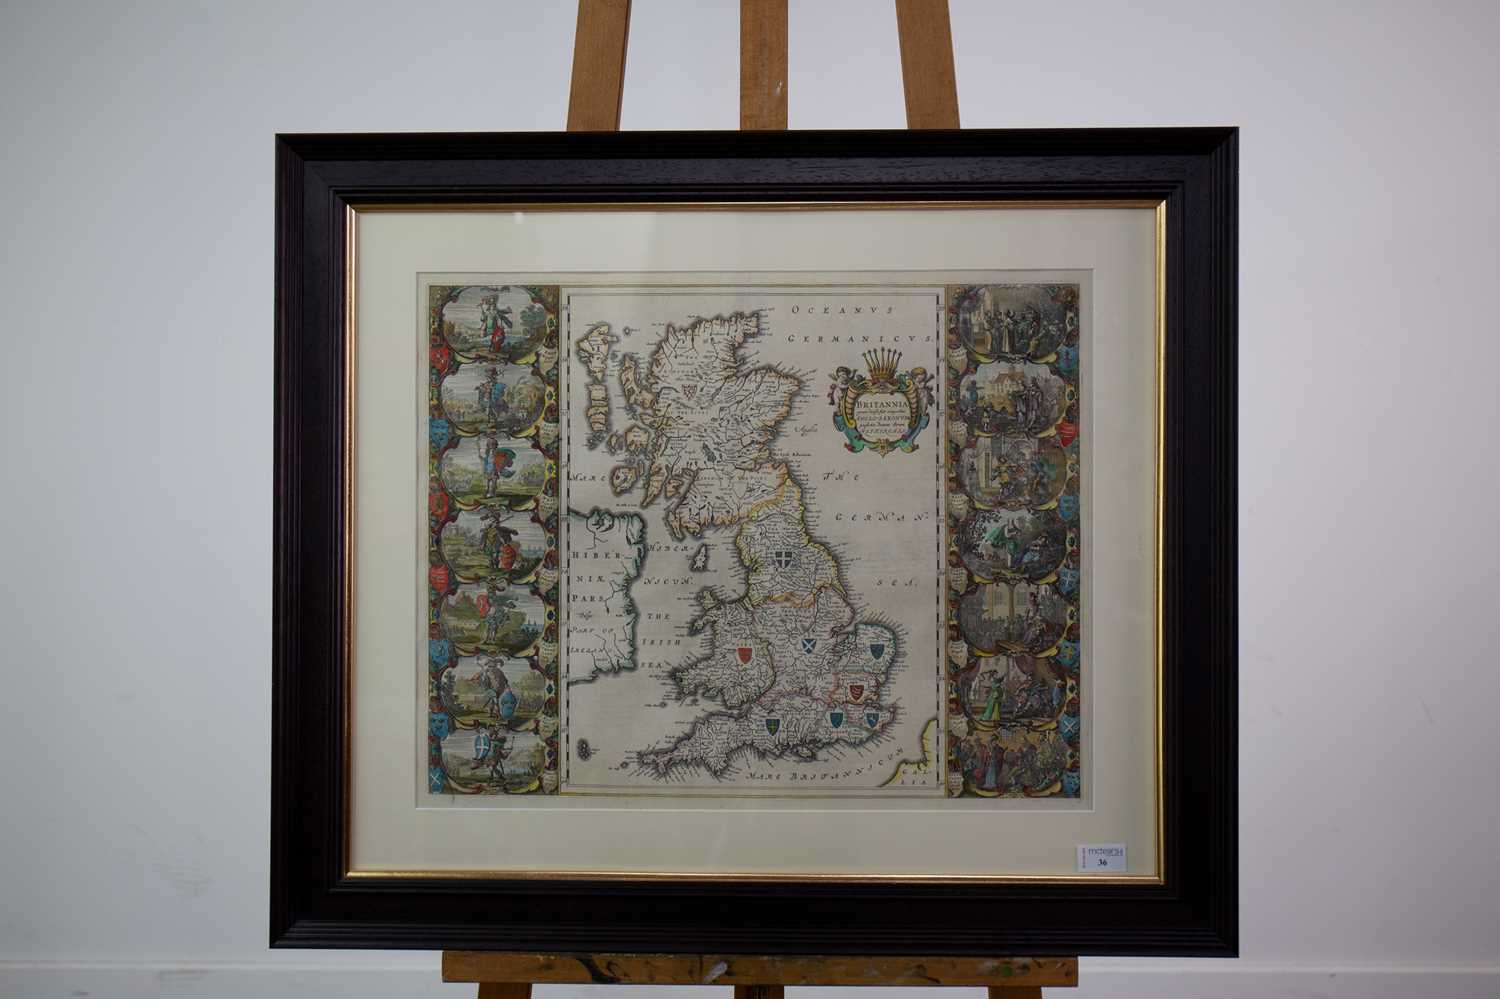 Lot 36 - A FINE 17TH CENTURY MAP OF THE ANGLO-SAXON HEPTARCHY BY BLAEU